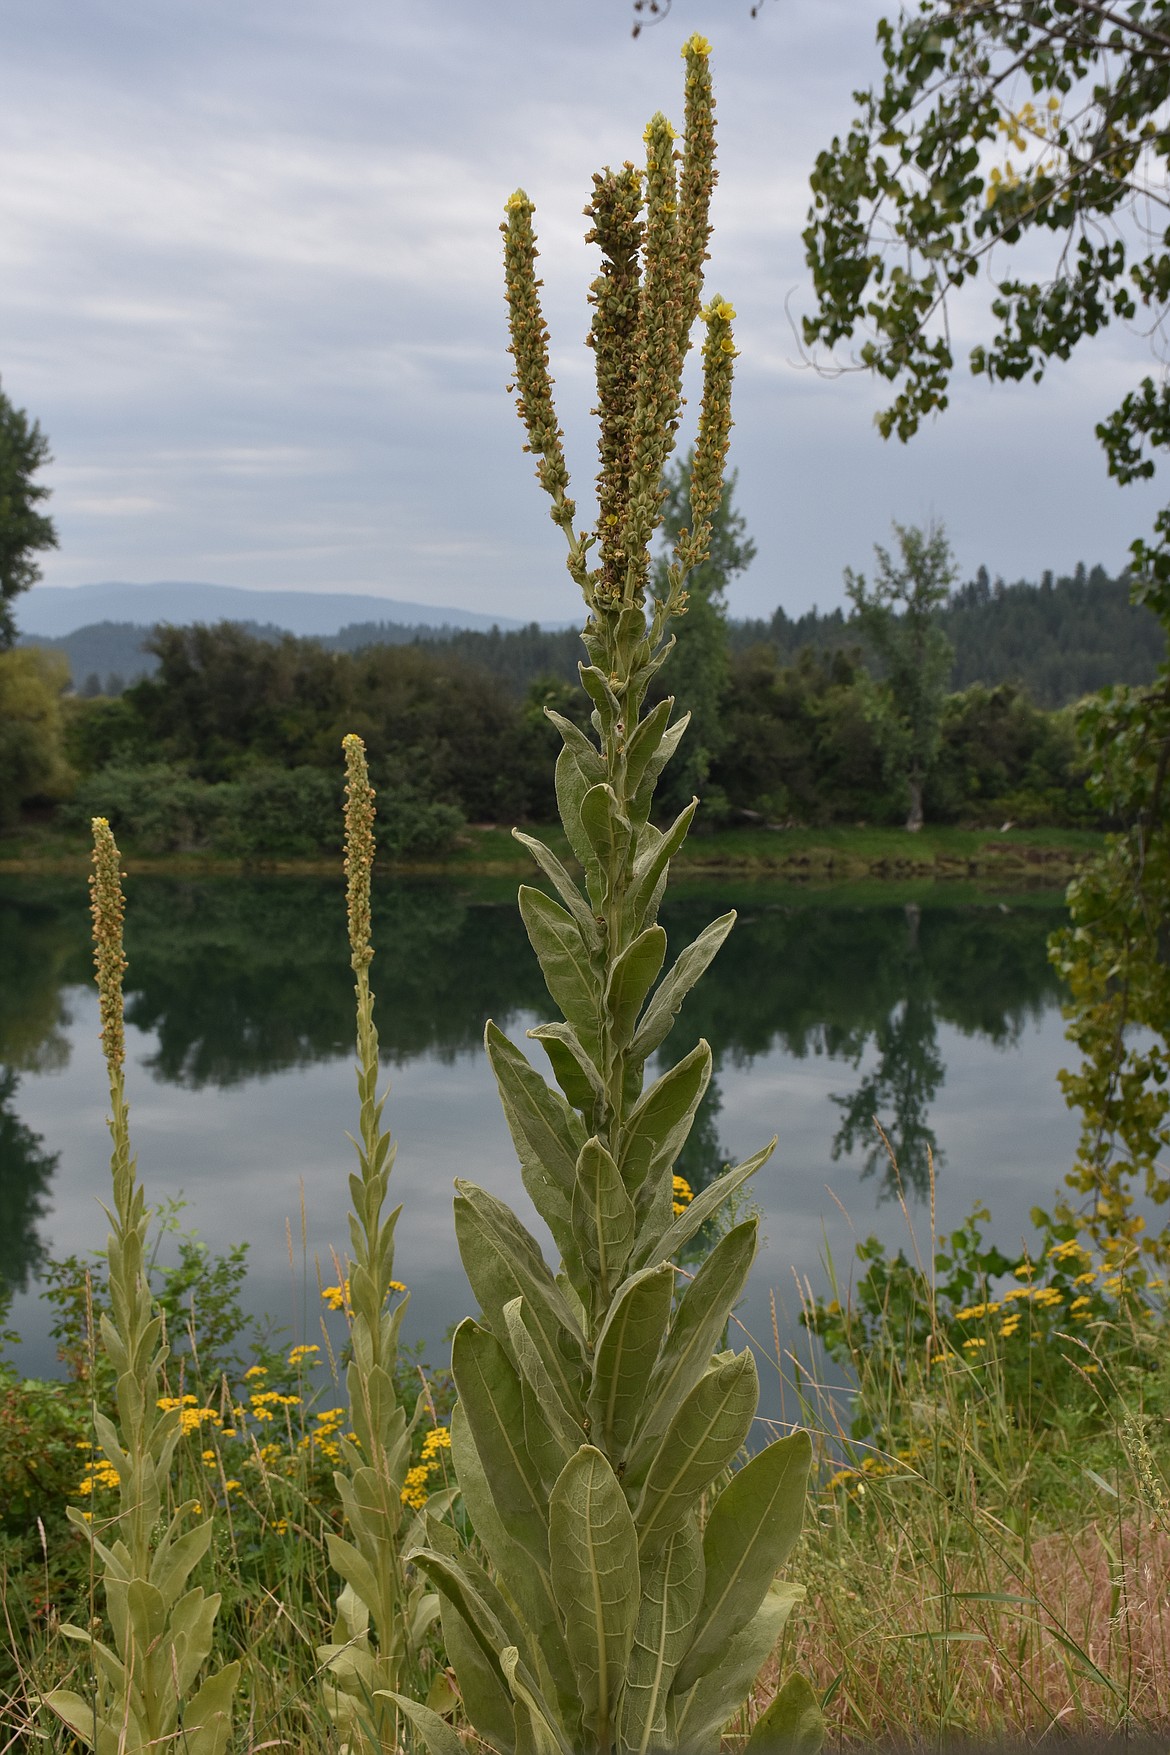 In its second year the mullein is a flowering plant with a single stock that is 2 to 6 feet tall.